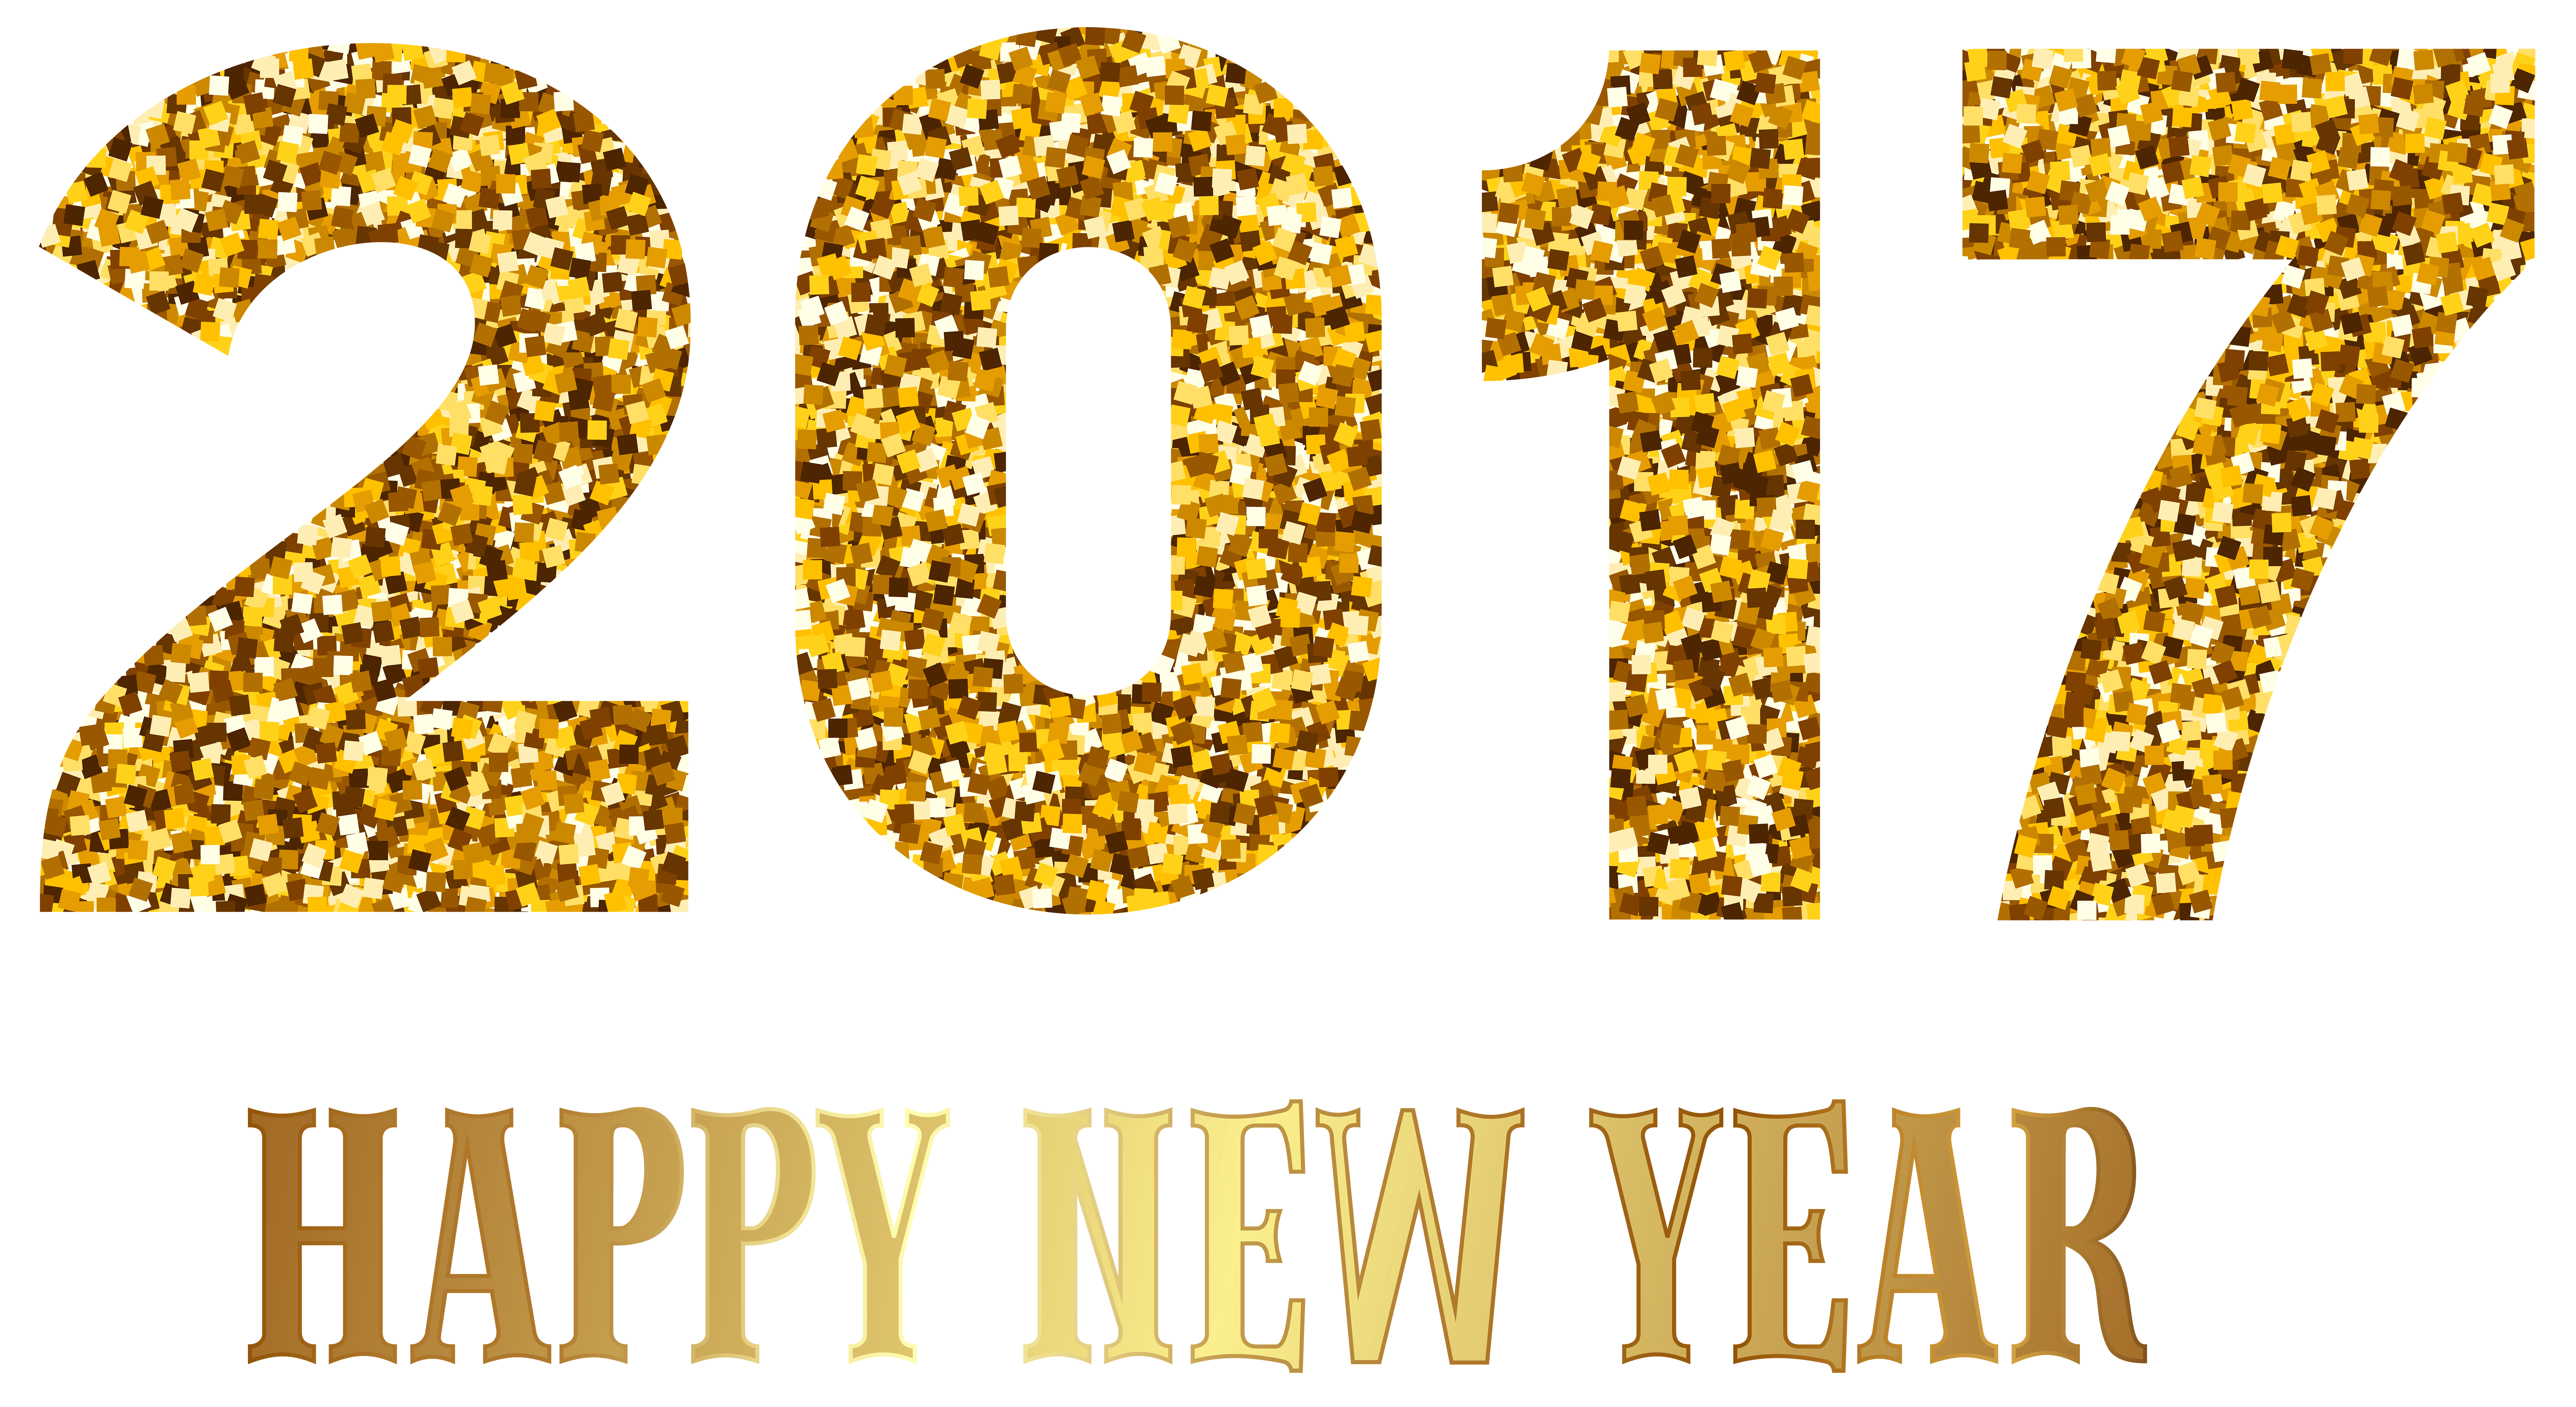 2017 Happy New Year Transparent PNG Image | Gallery ...